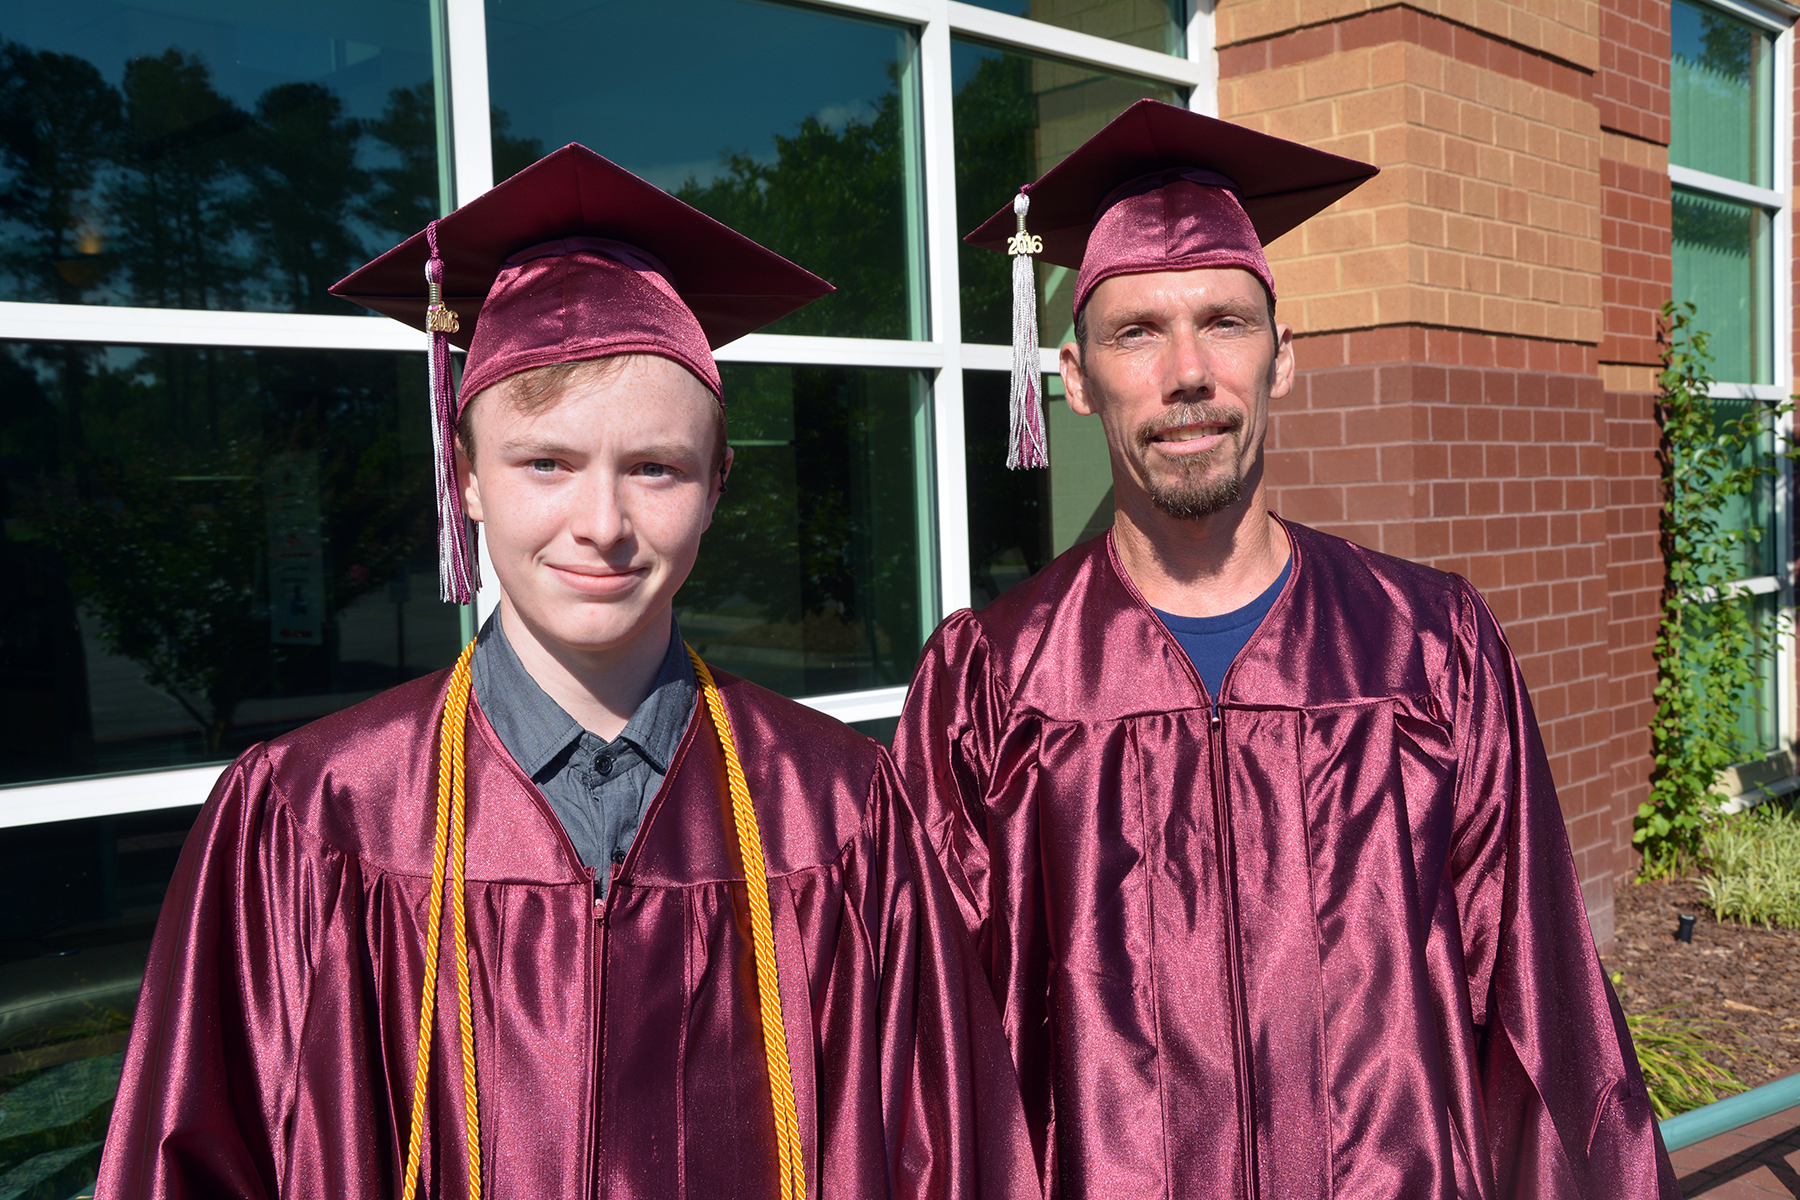 Pictured are Caleb Adcock, left, and Arnold Bennett, who were guest speakers at the Adult High School and High School Equivalency graduation at Richmond Community College.